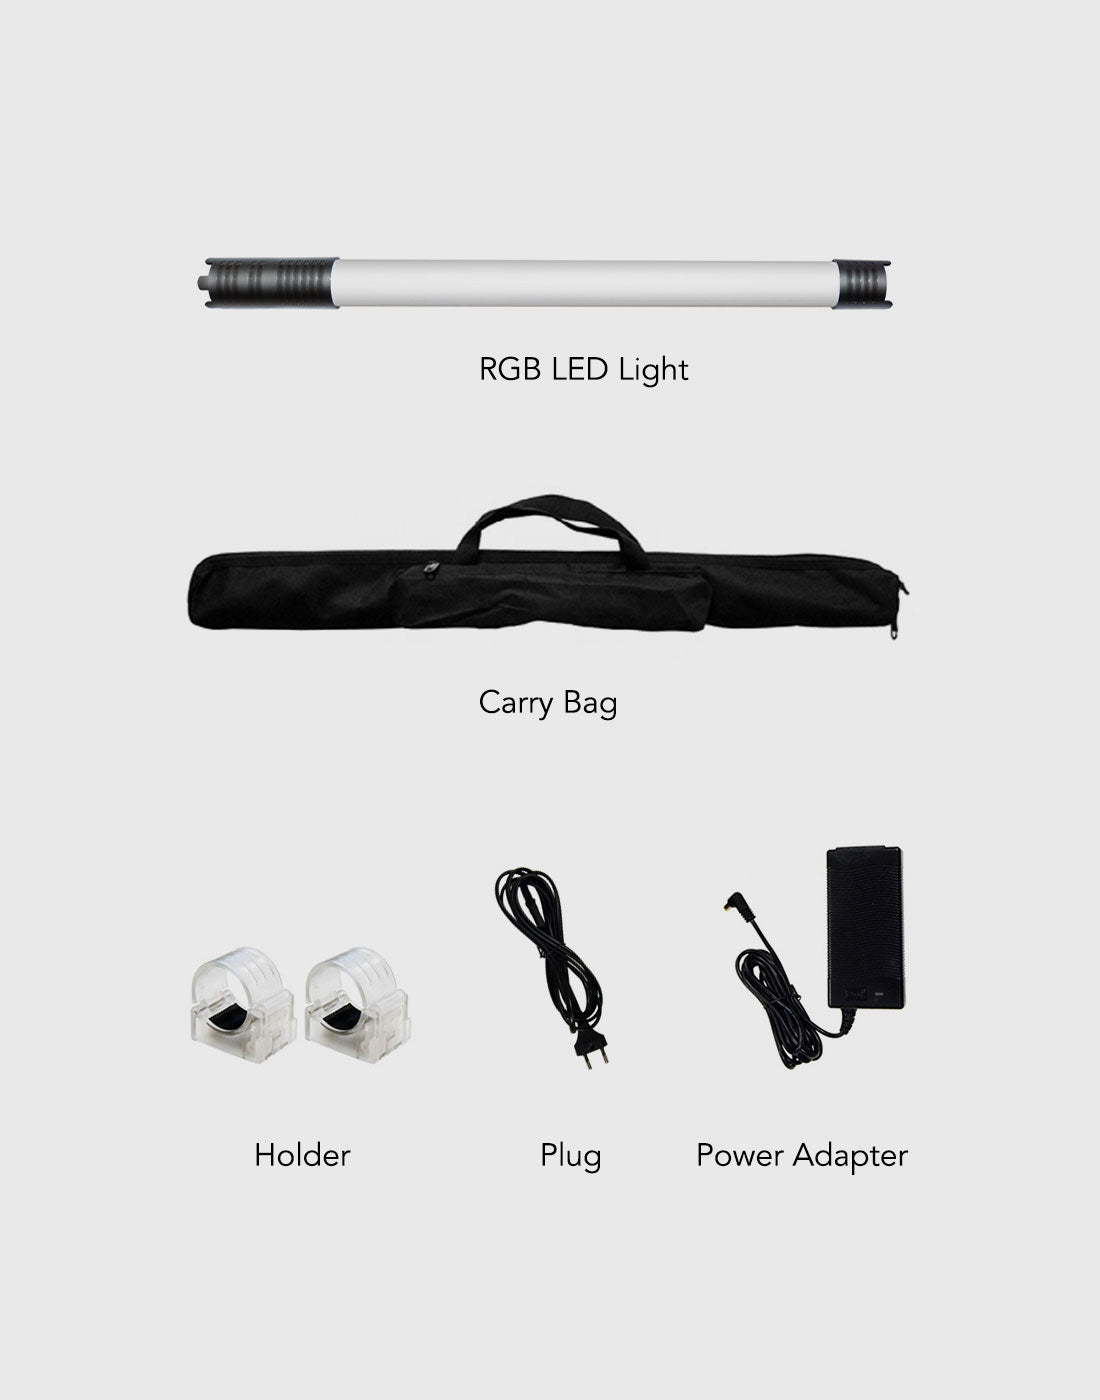 Studio RGB Hand held Light for Photoshoots and Videos